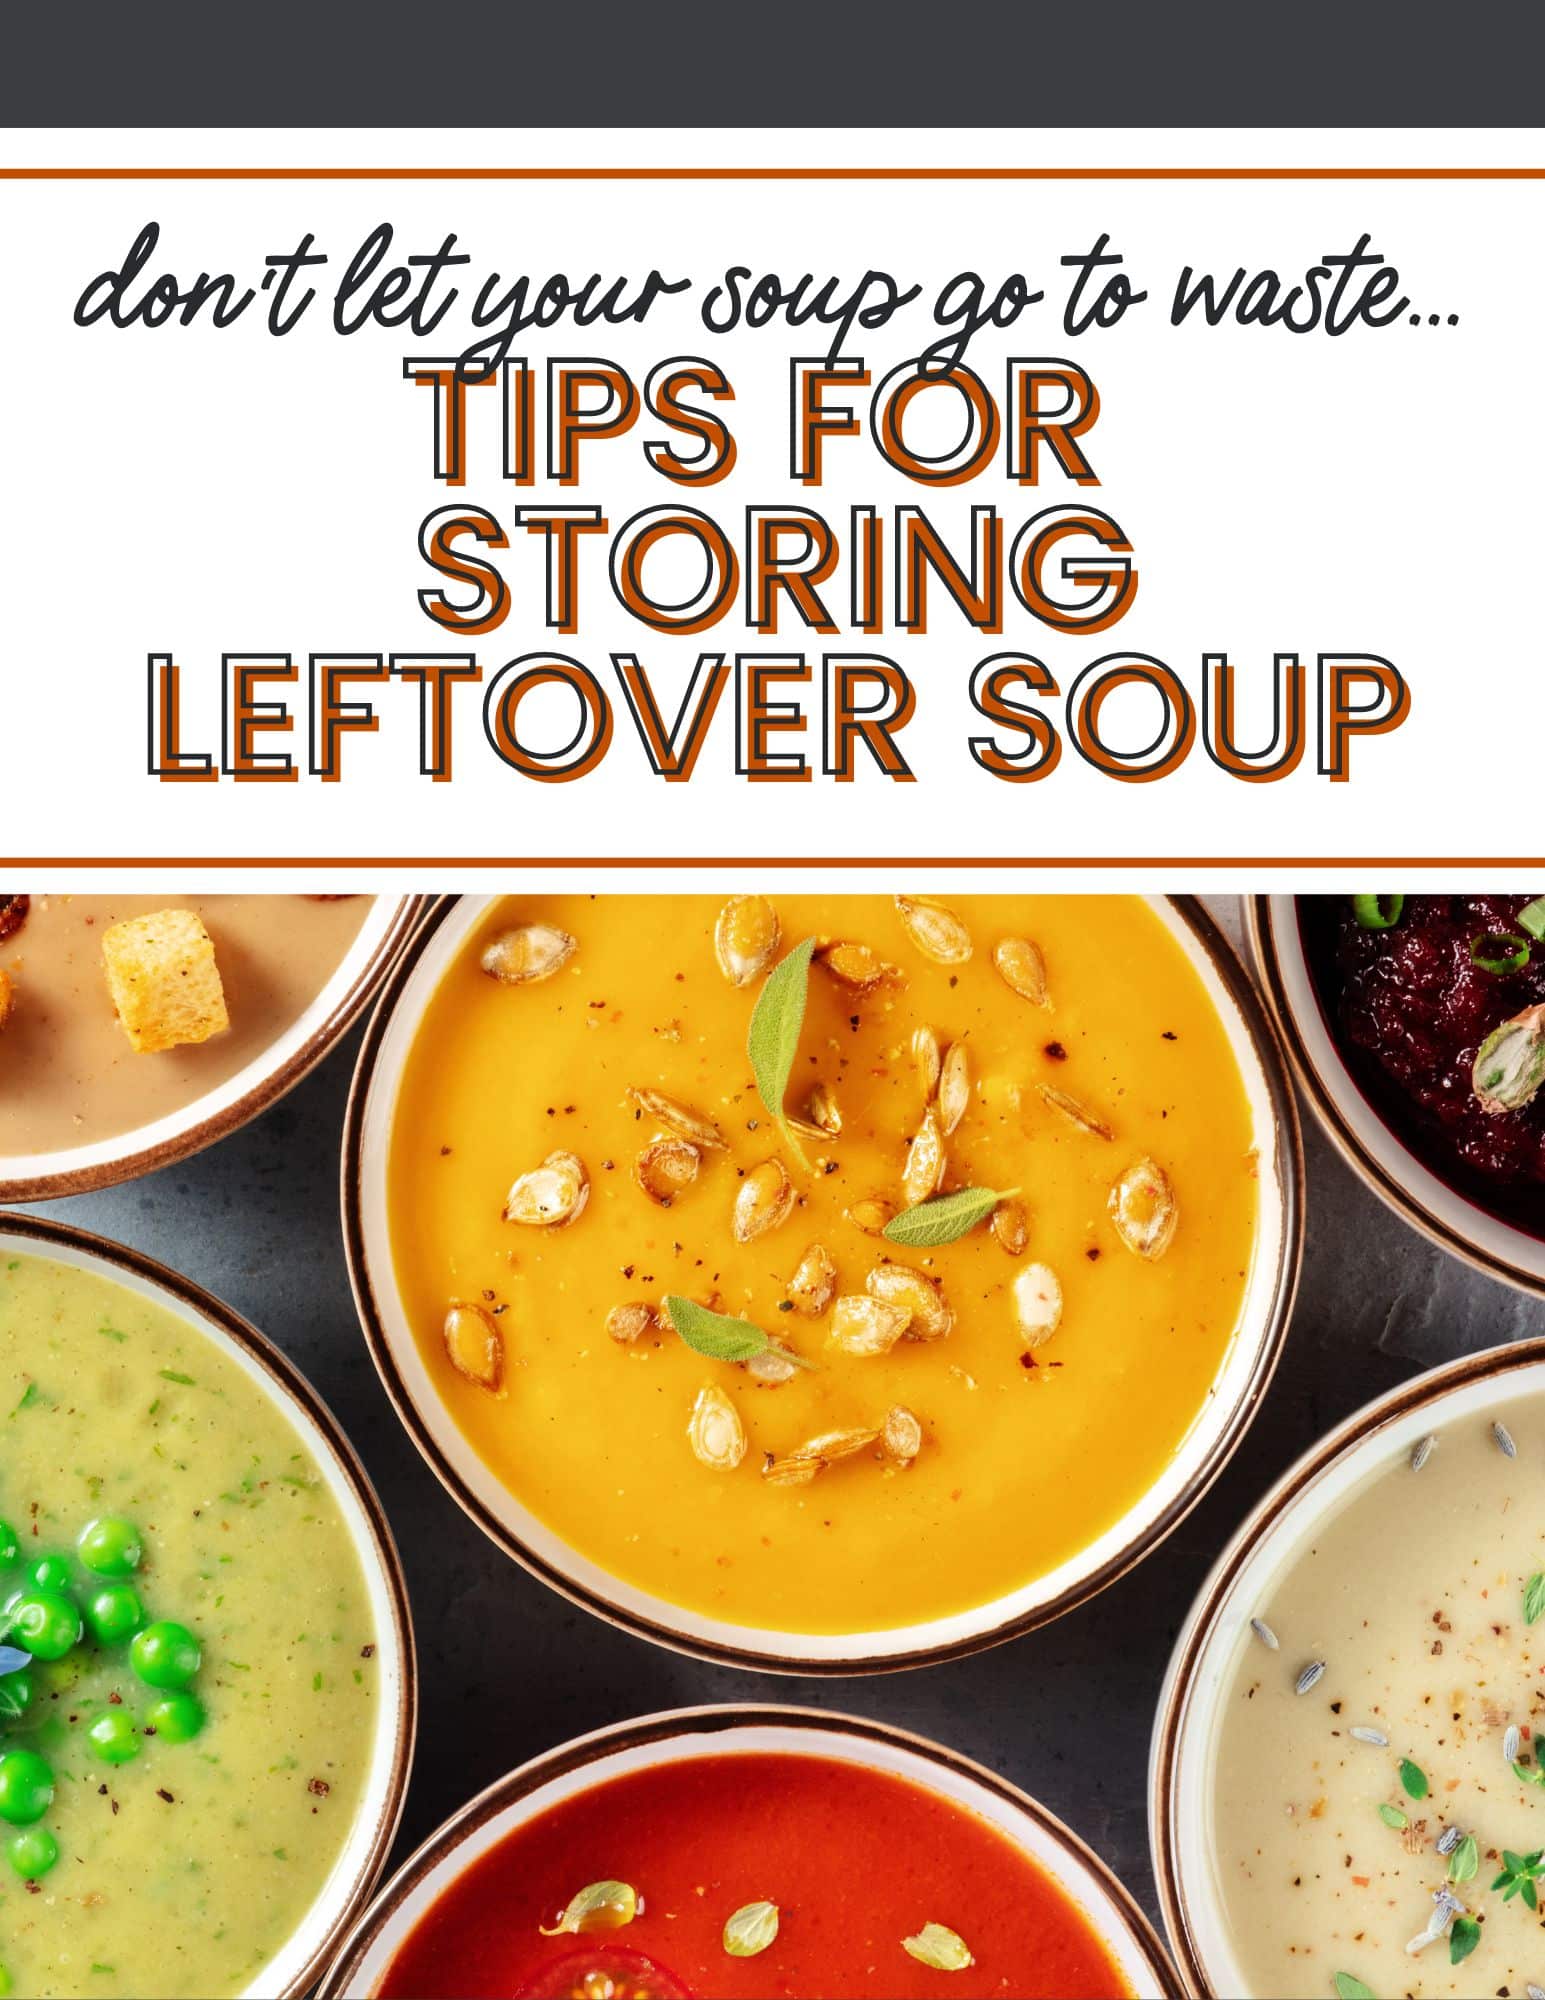 a graphic for tips for storing leftover soup with various kinds of soup on it.